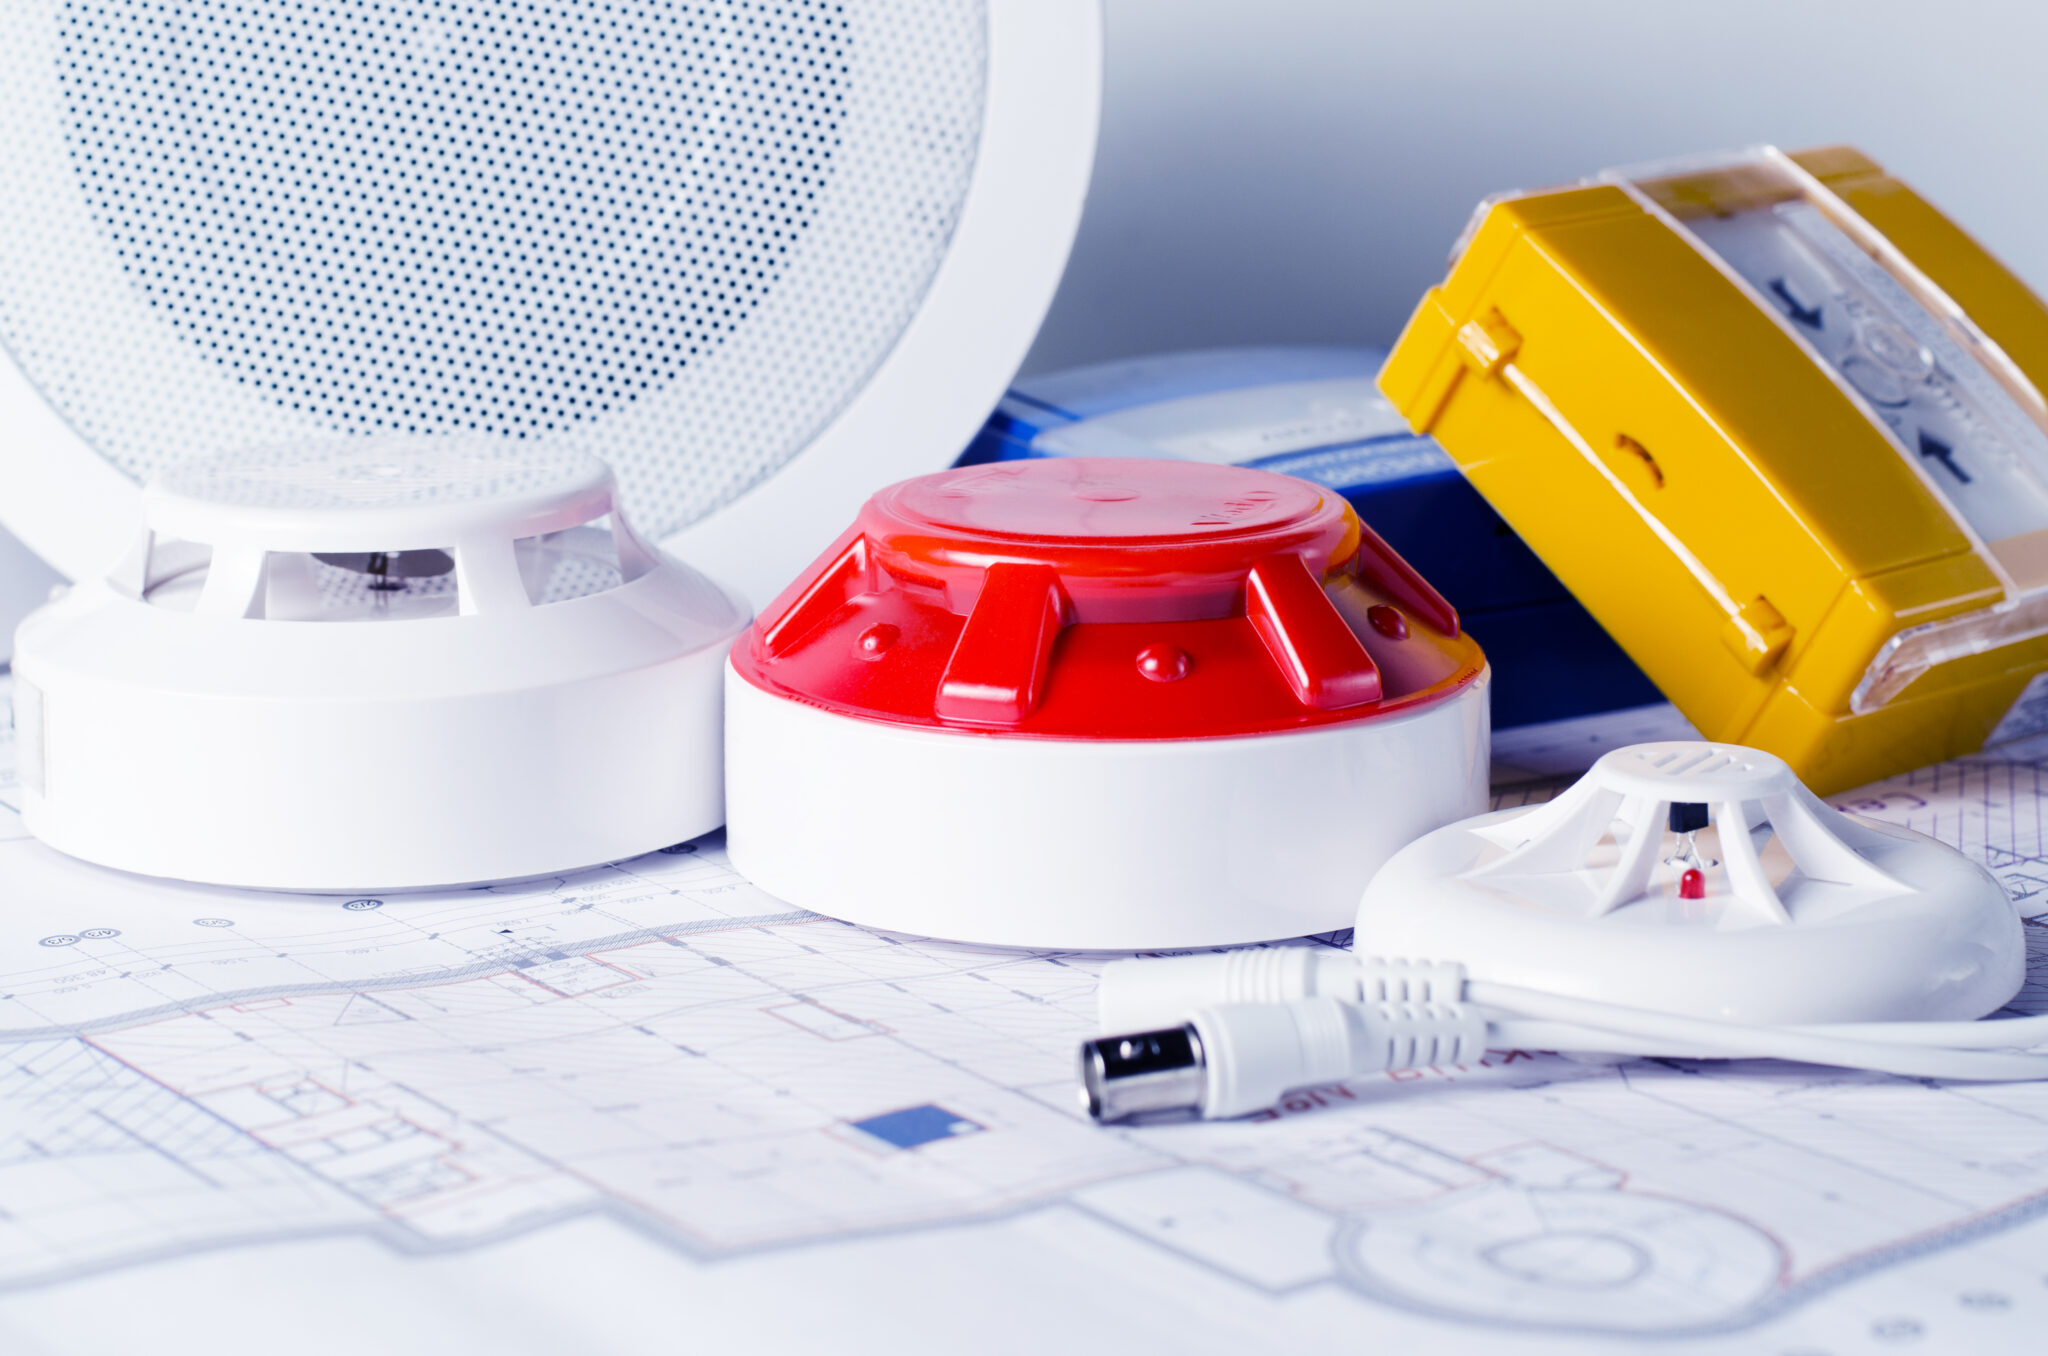 Fire protection equipment sitting on blueprints | Featured image for Appliance Servicing and Repair - Restricted Electrical Licensing Course by Get Skilled Training